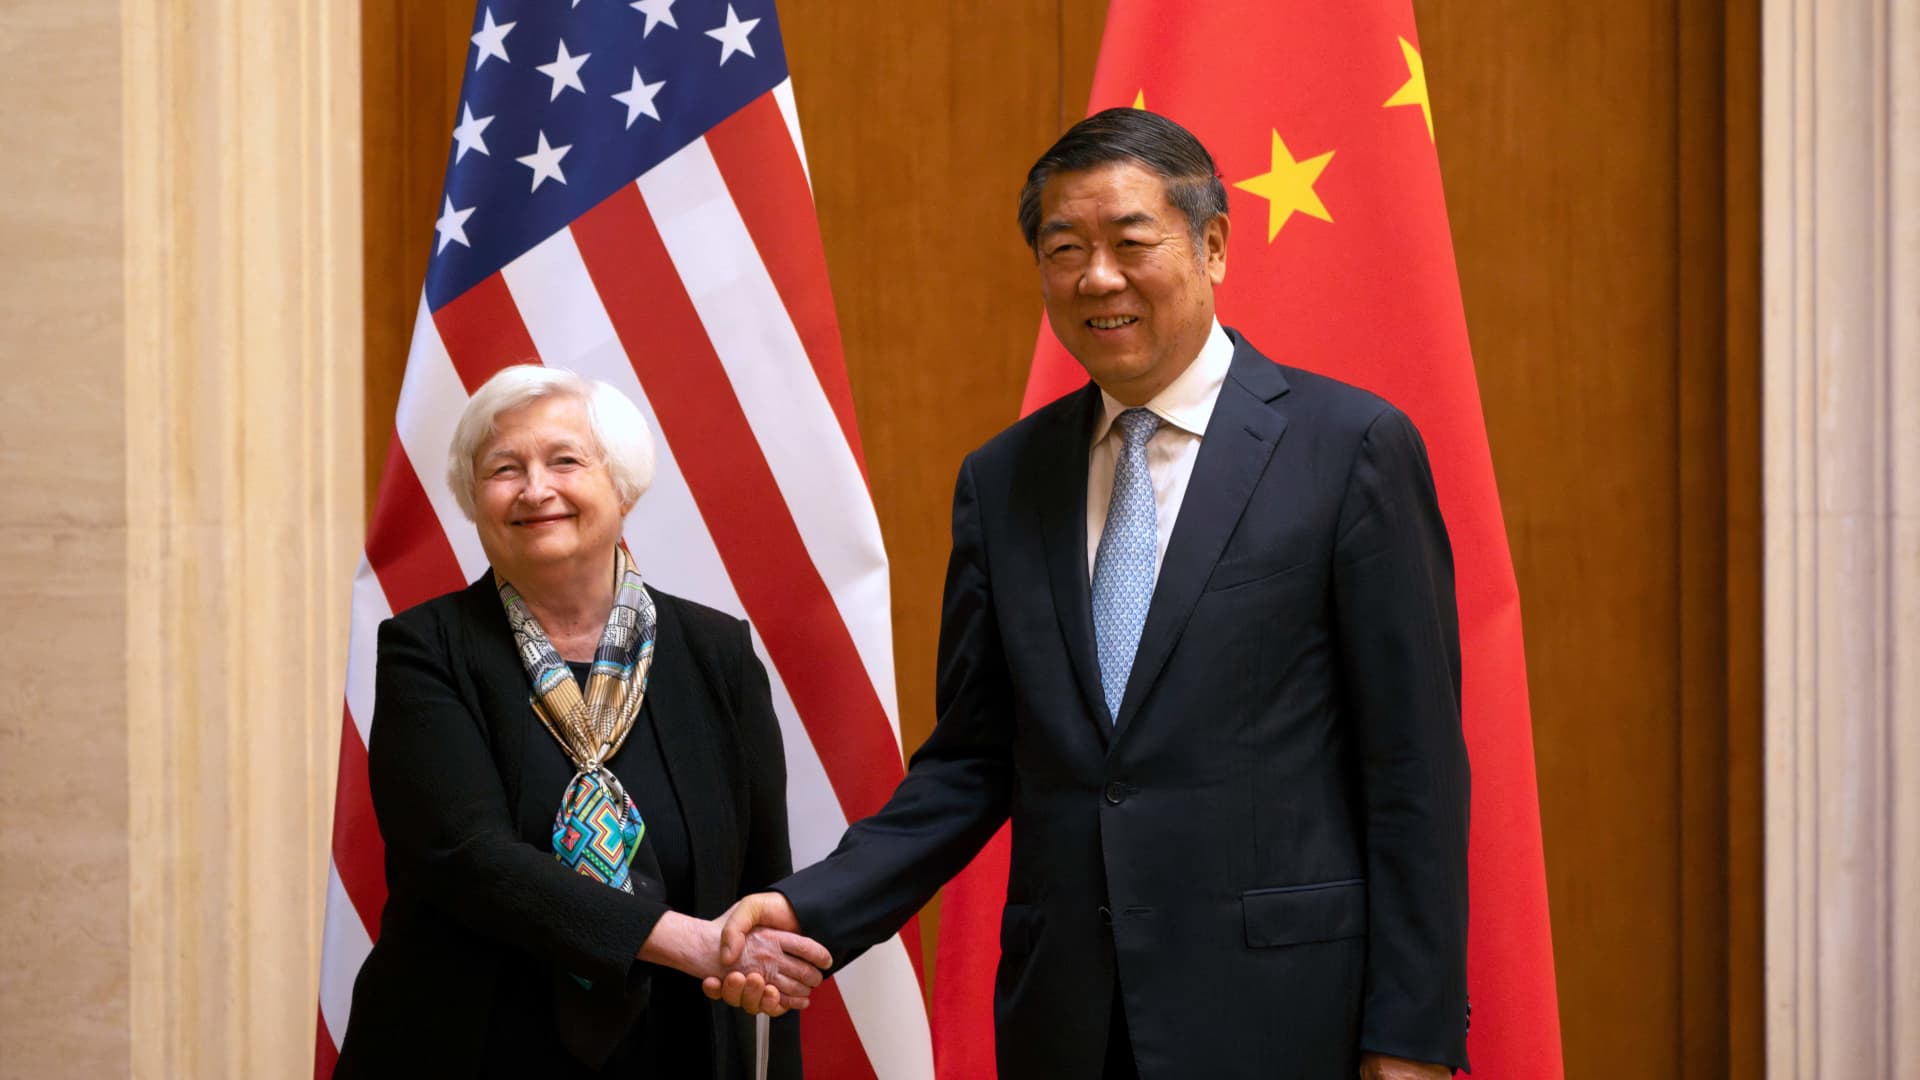 Yellen to host China's He Lifeng for 'intensive diplomacy' ahead of APEC